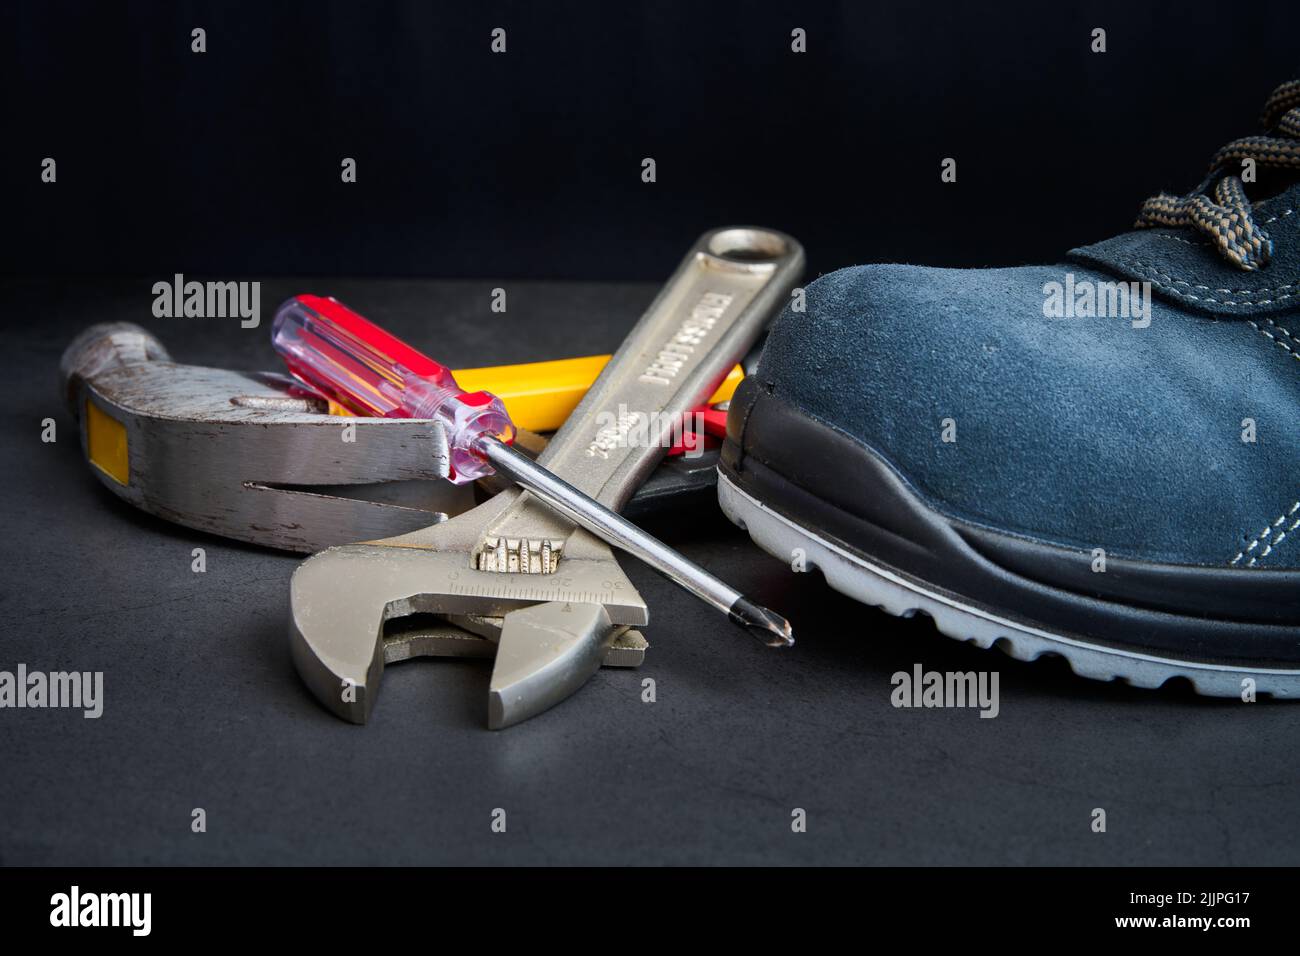 A closeup of metal tools next to a blue boot on a blurry black background Stock Photo